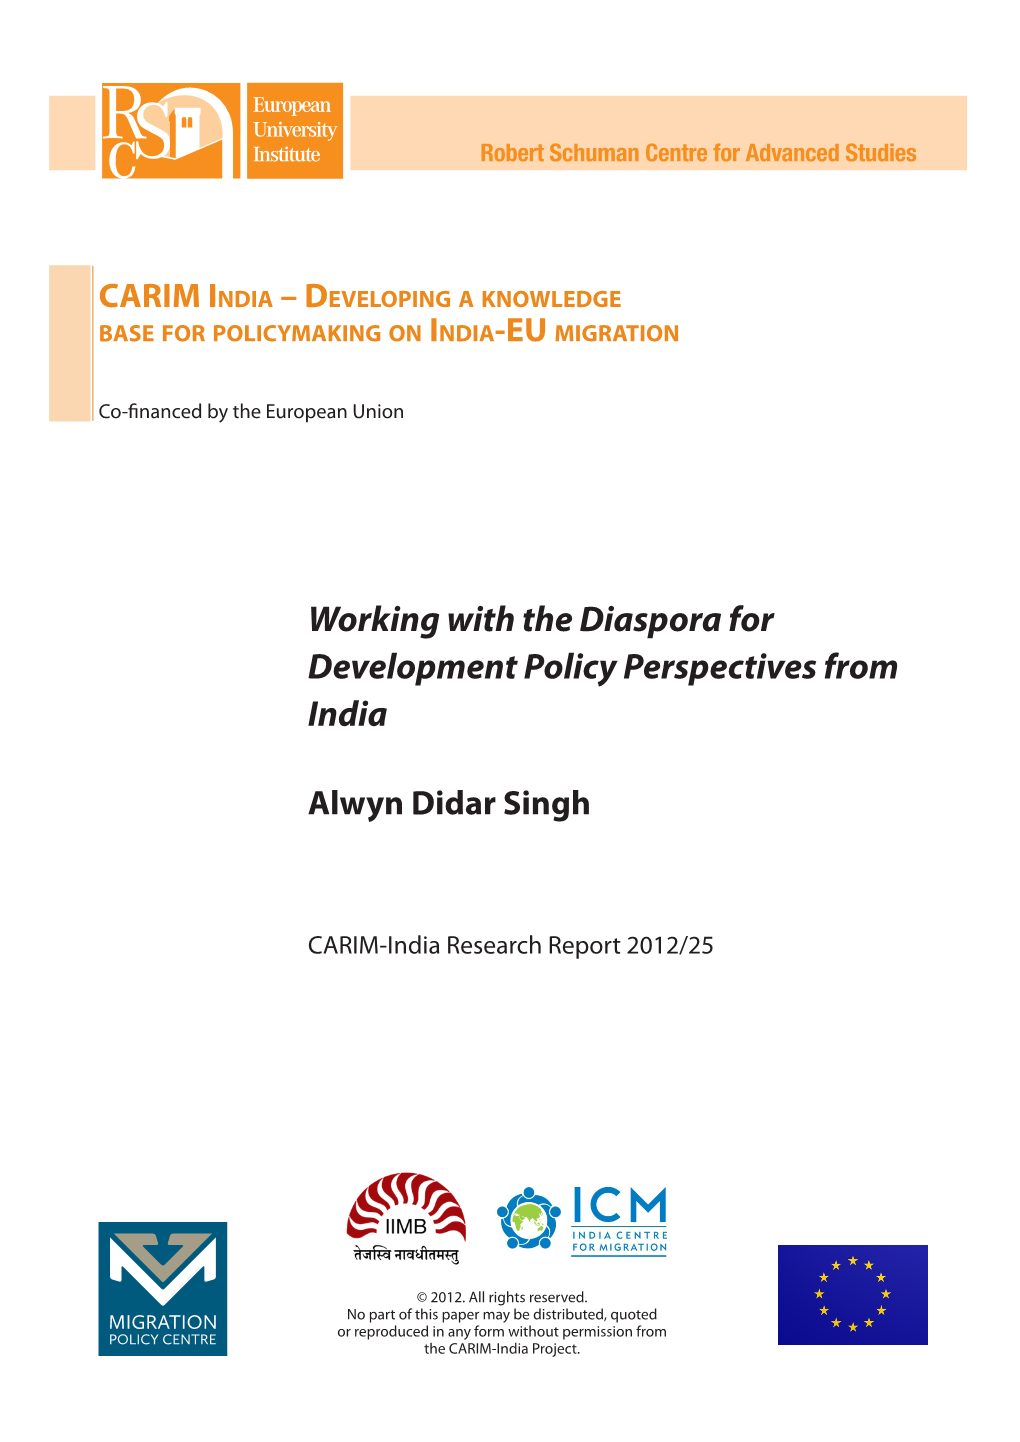 Working with the Diaspora for Development Policy Perspectives from India